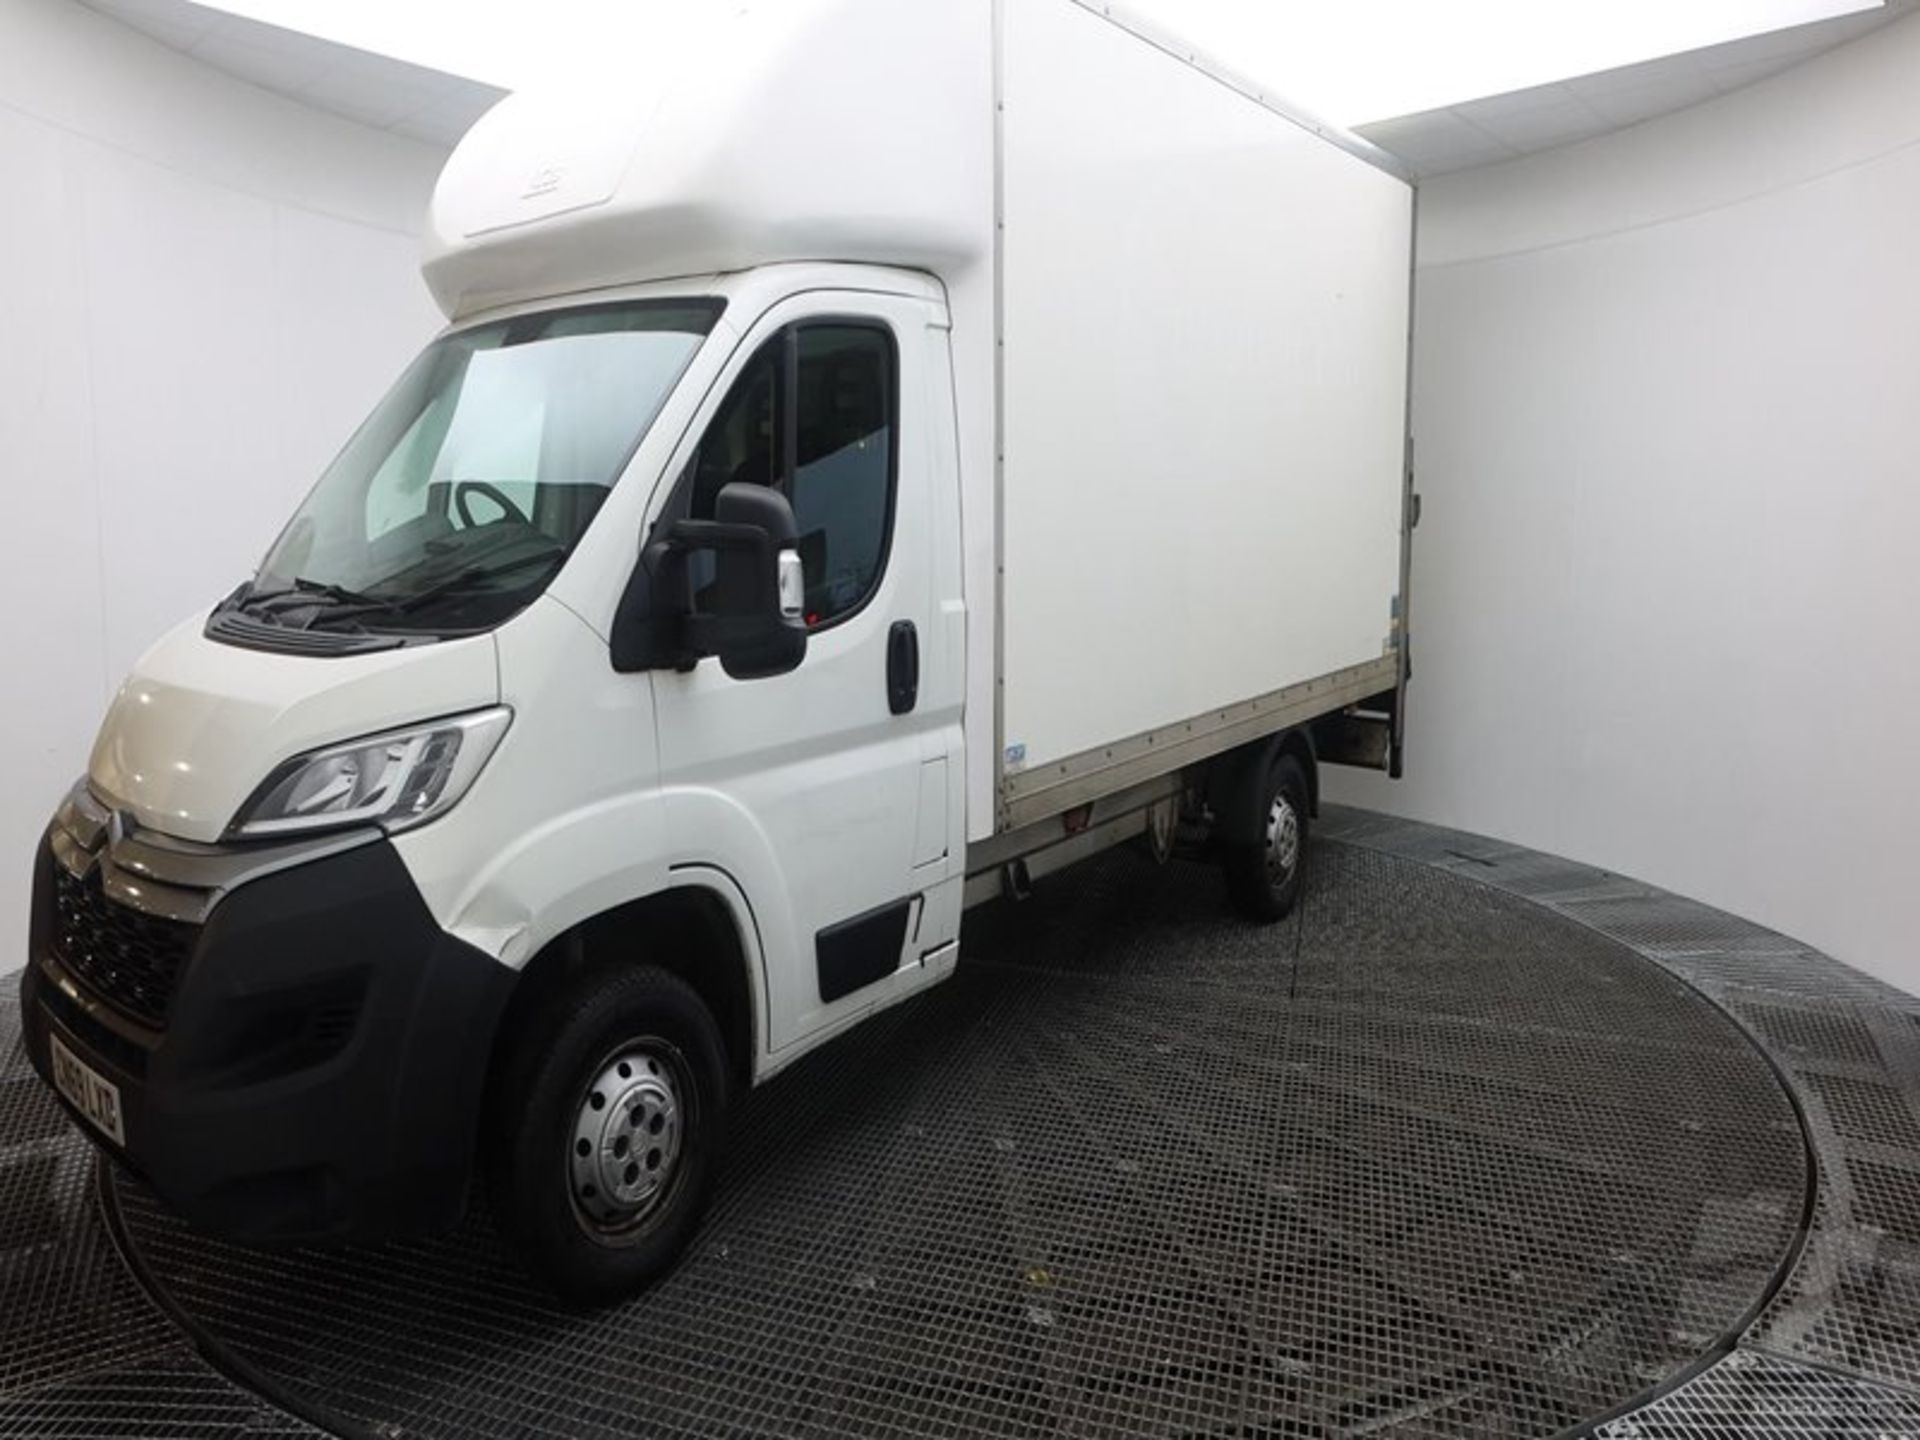 CITROEN RELAY 2.0HDI"160"LONG WHEEL BASE LUTON BOX VAN WITH ELECTRIC TAIL-LIFT -2020 MODEL -1 OWNER